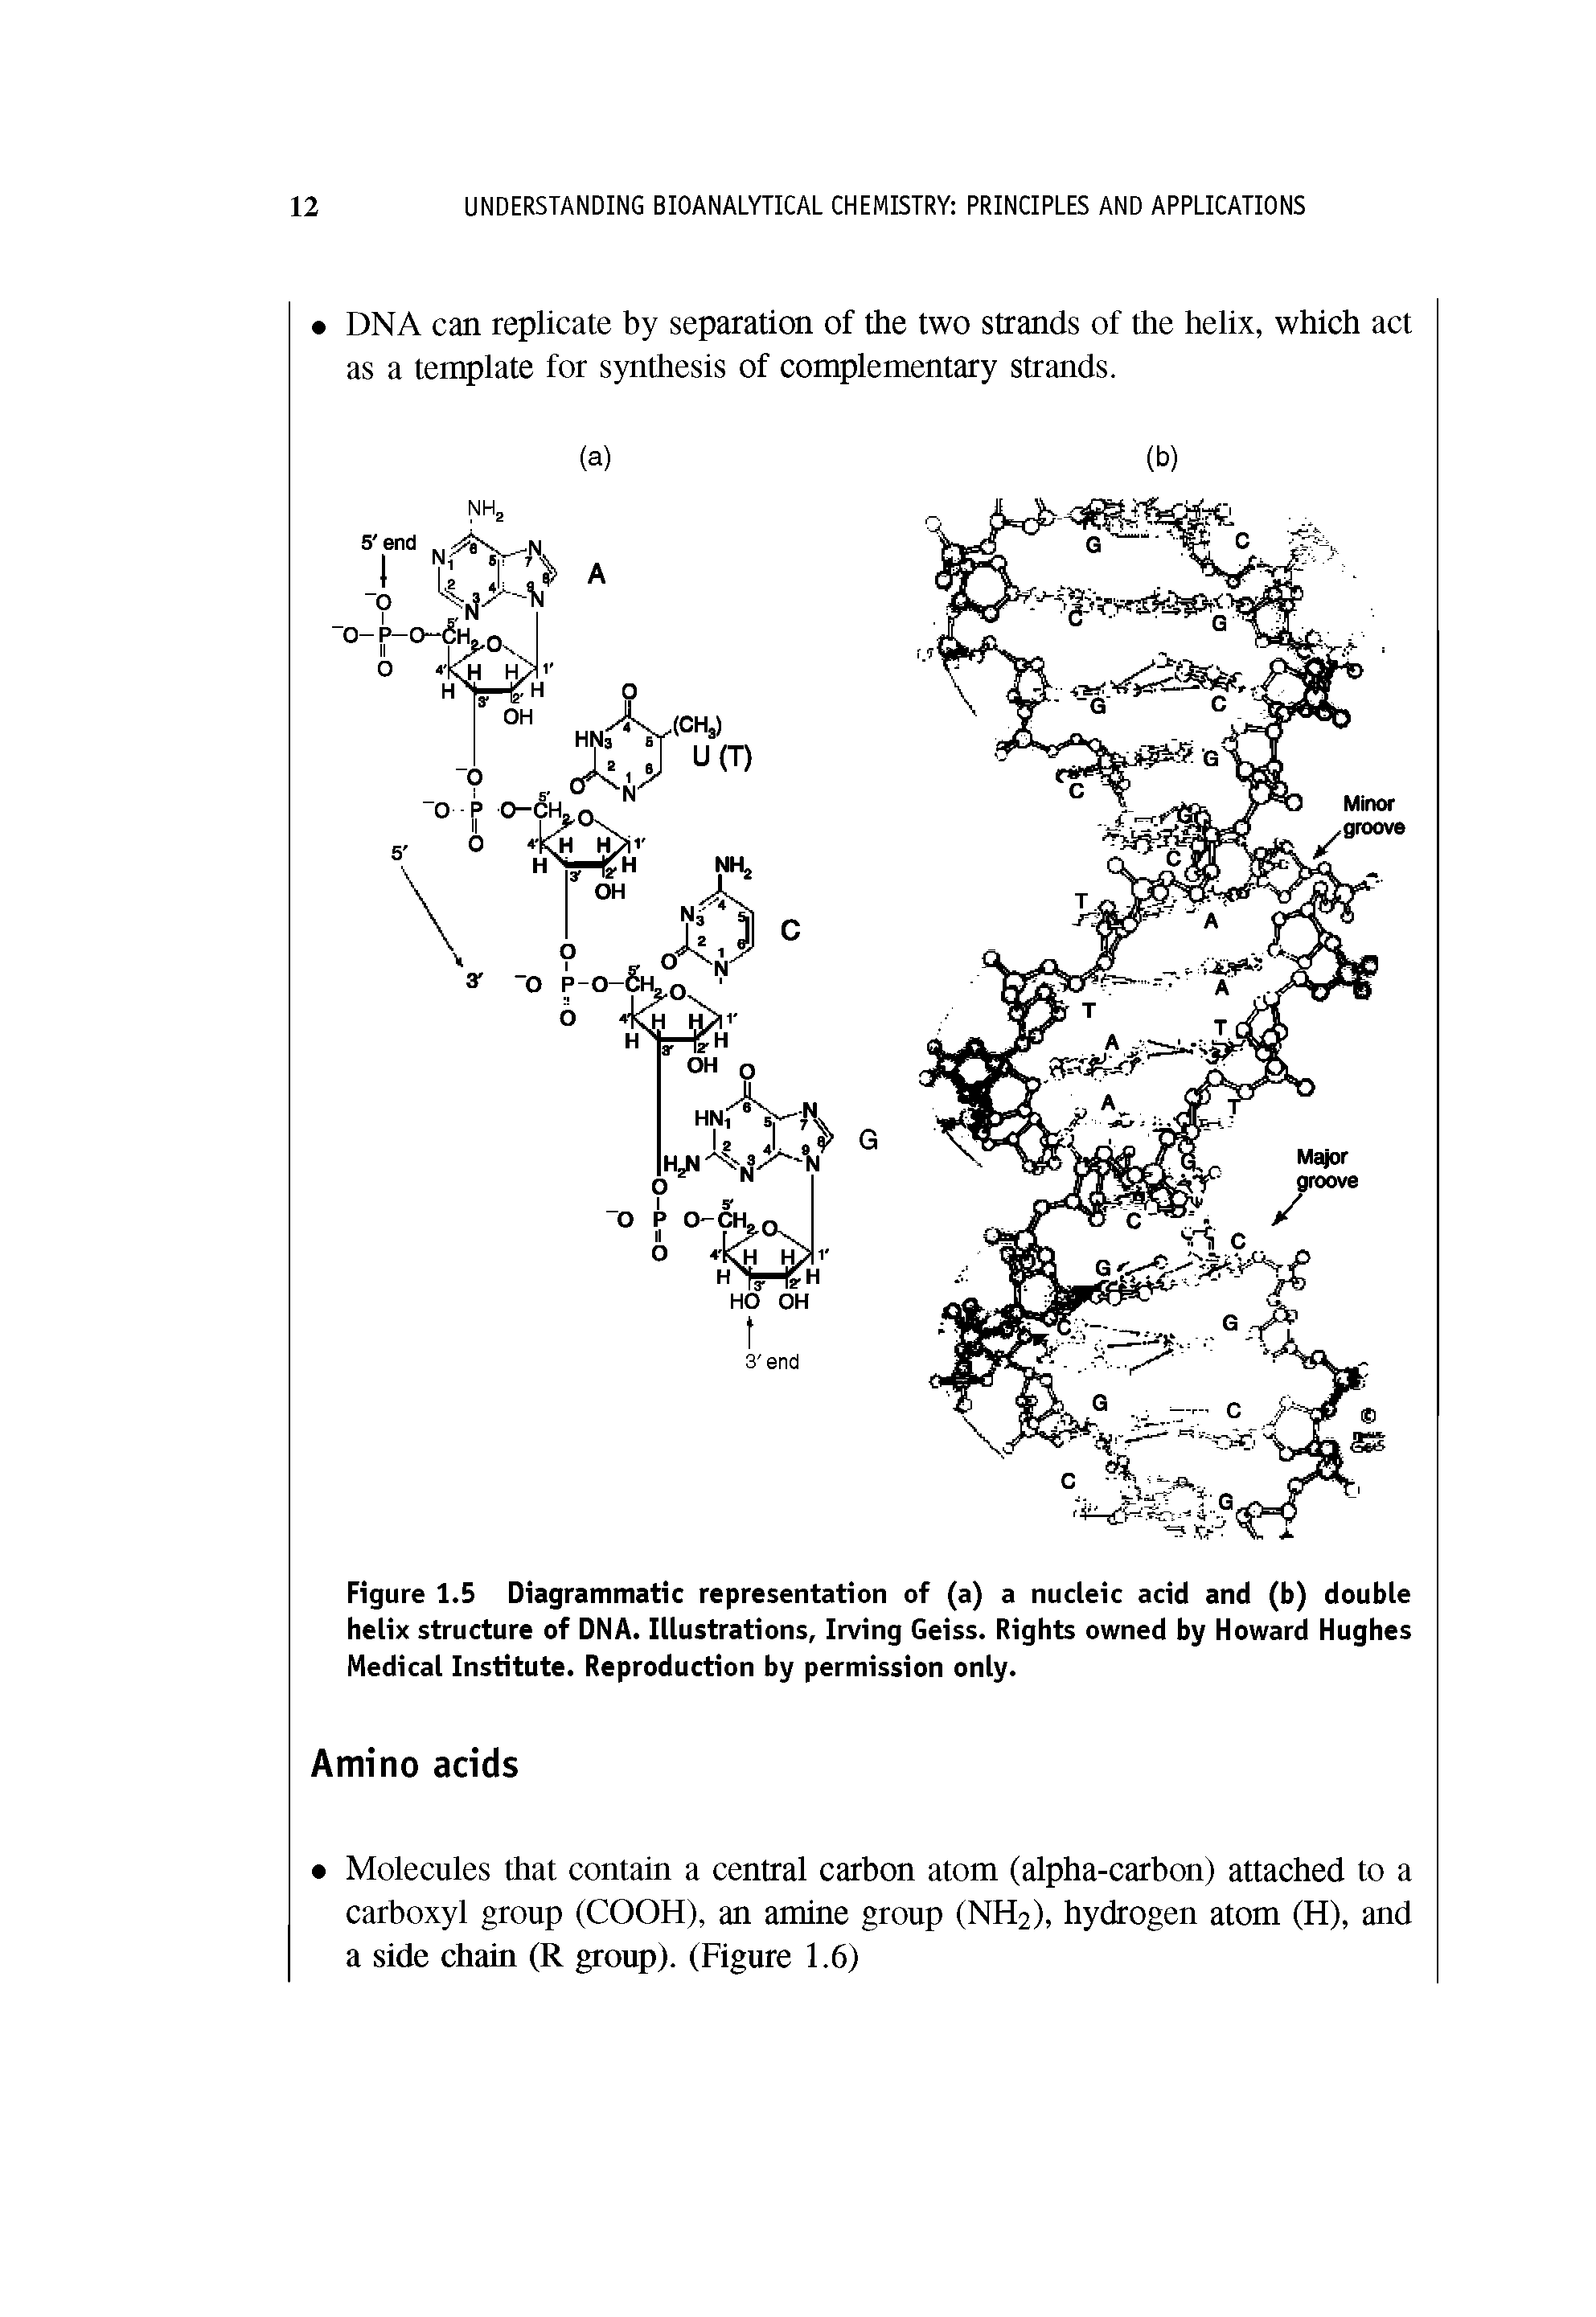 Figure 1.5 Diagrammatic representation of (a) a nucleic acid and (b) double helix structure of DNA. Illustrations, Irving Geiss. Rights owned by Howard Hughes Medical Institute. Reproduction by permission only.